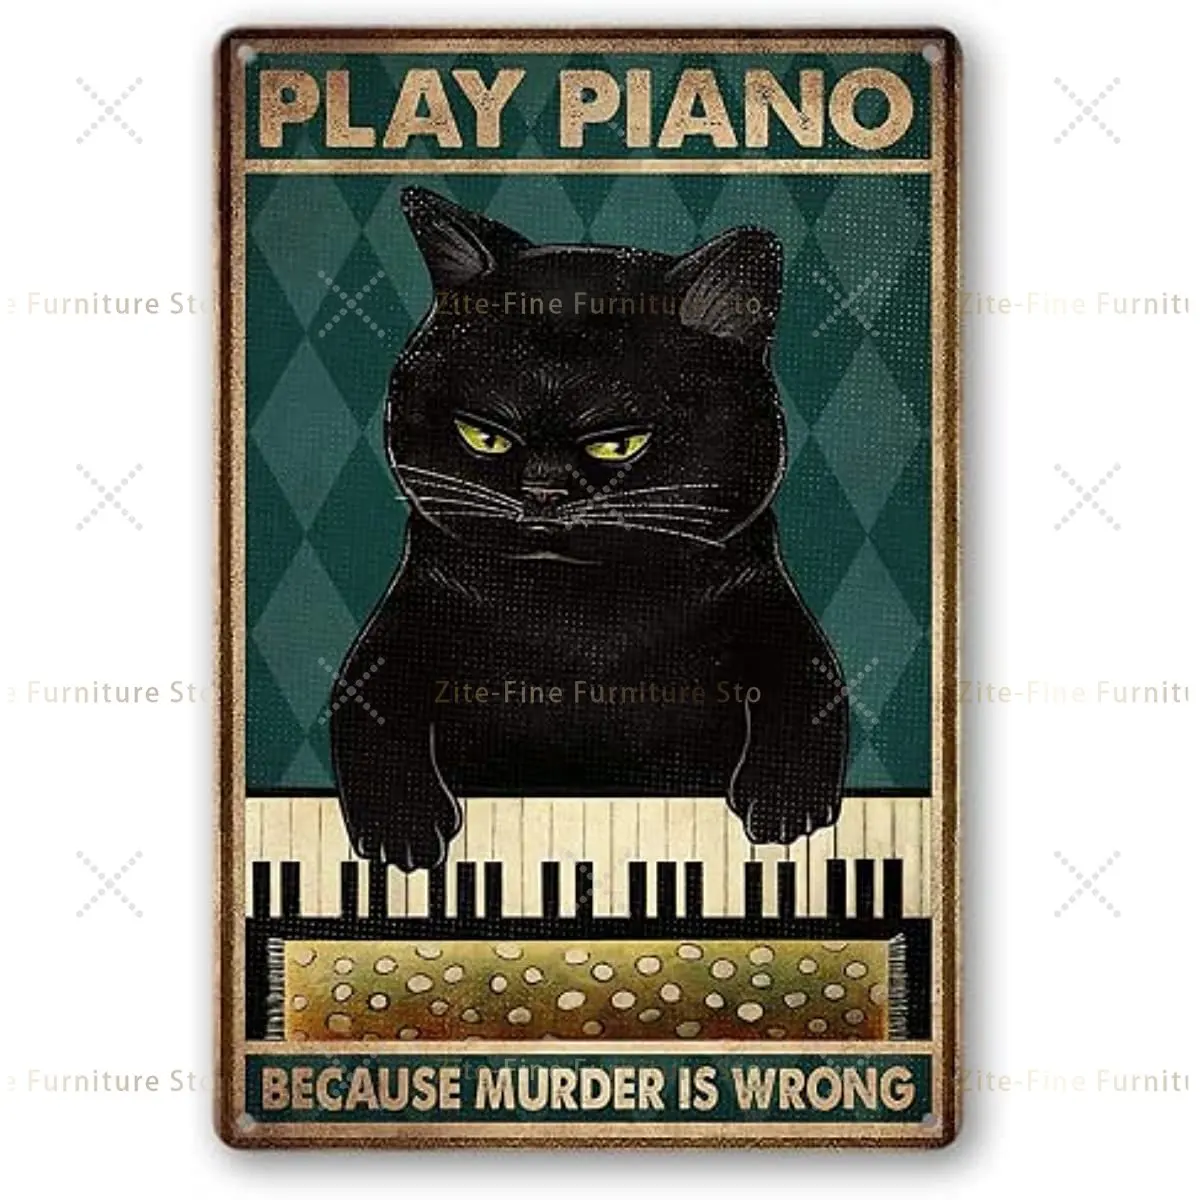 

Playing Piano Because Murder is Wrong Black Cat Sign, Vintage Retro Metal Tin Sign Pub Bar Man Cave Club Decoration 8 x 12inch